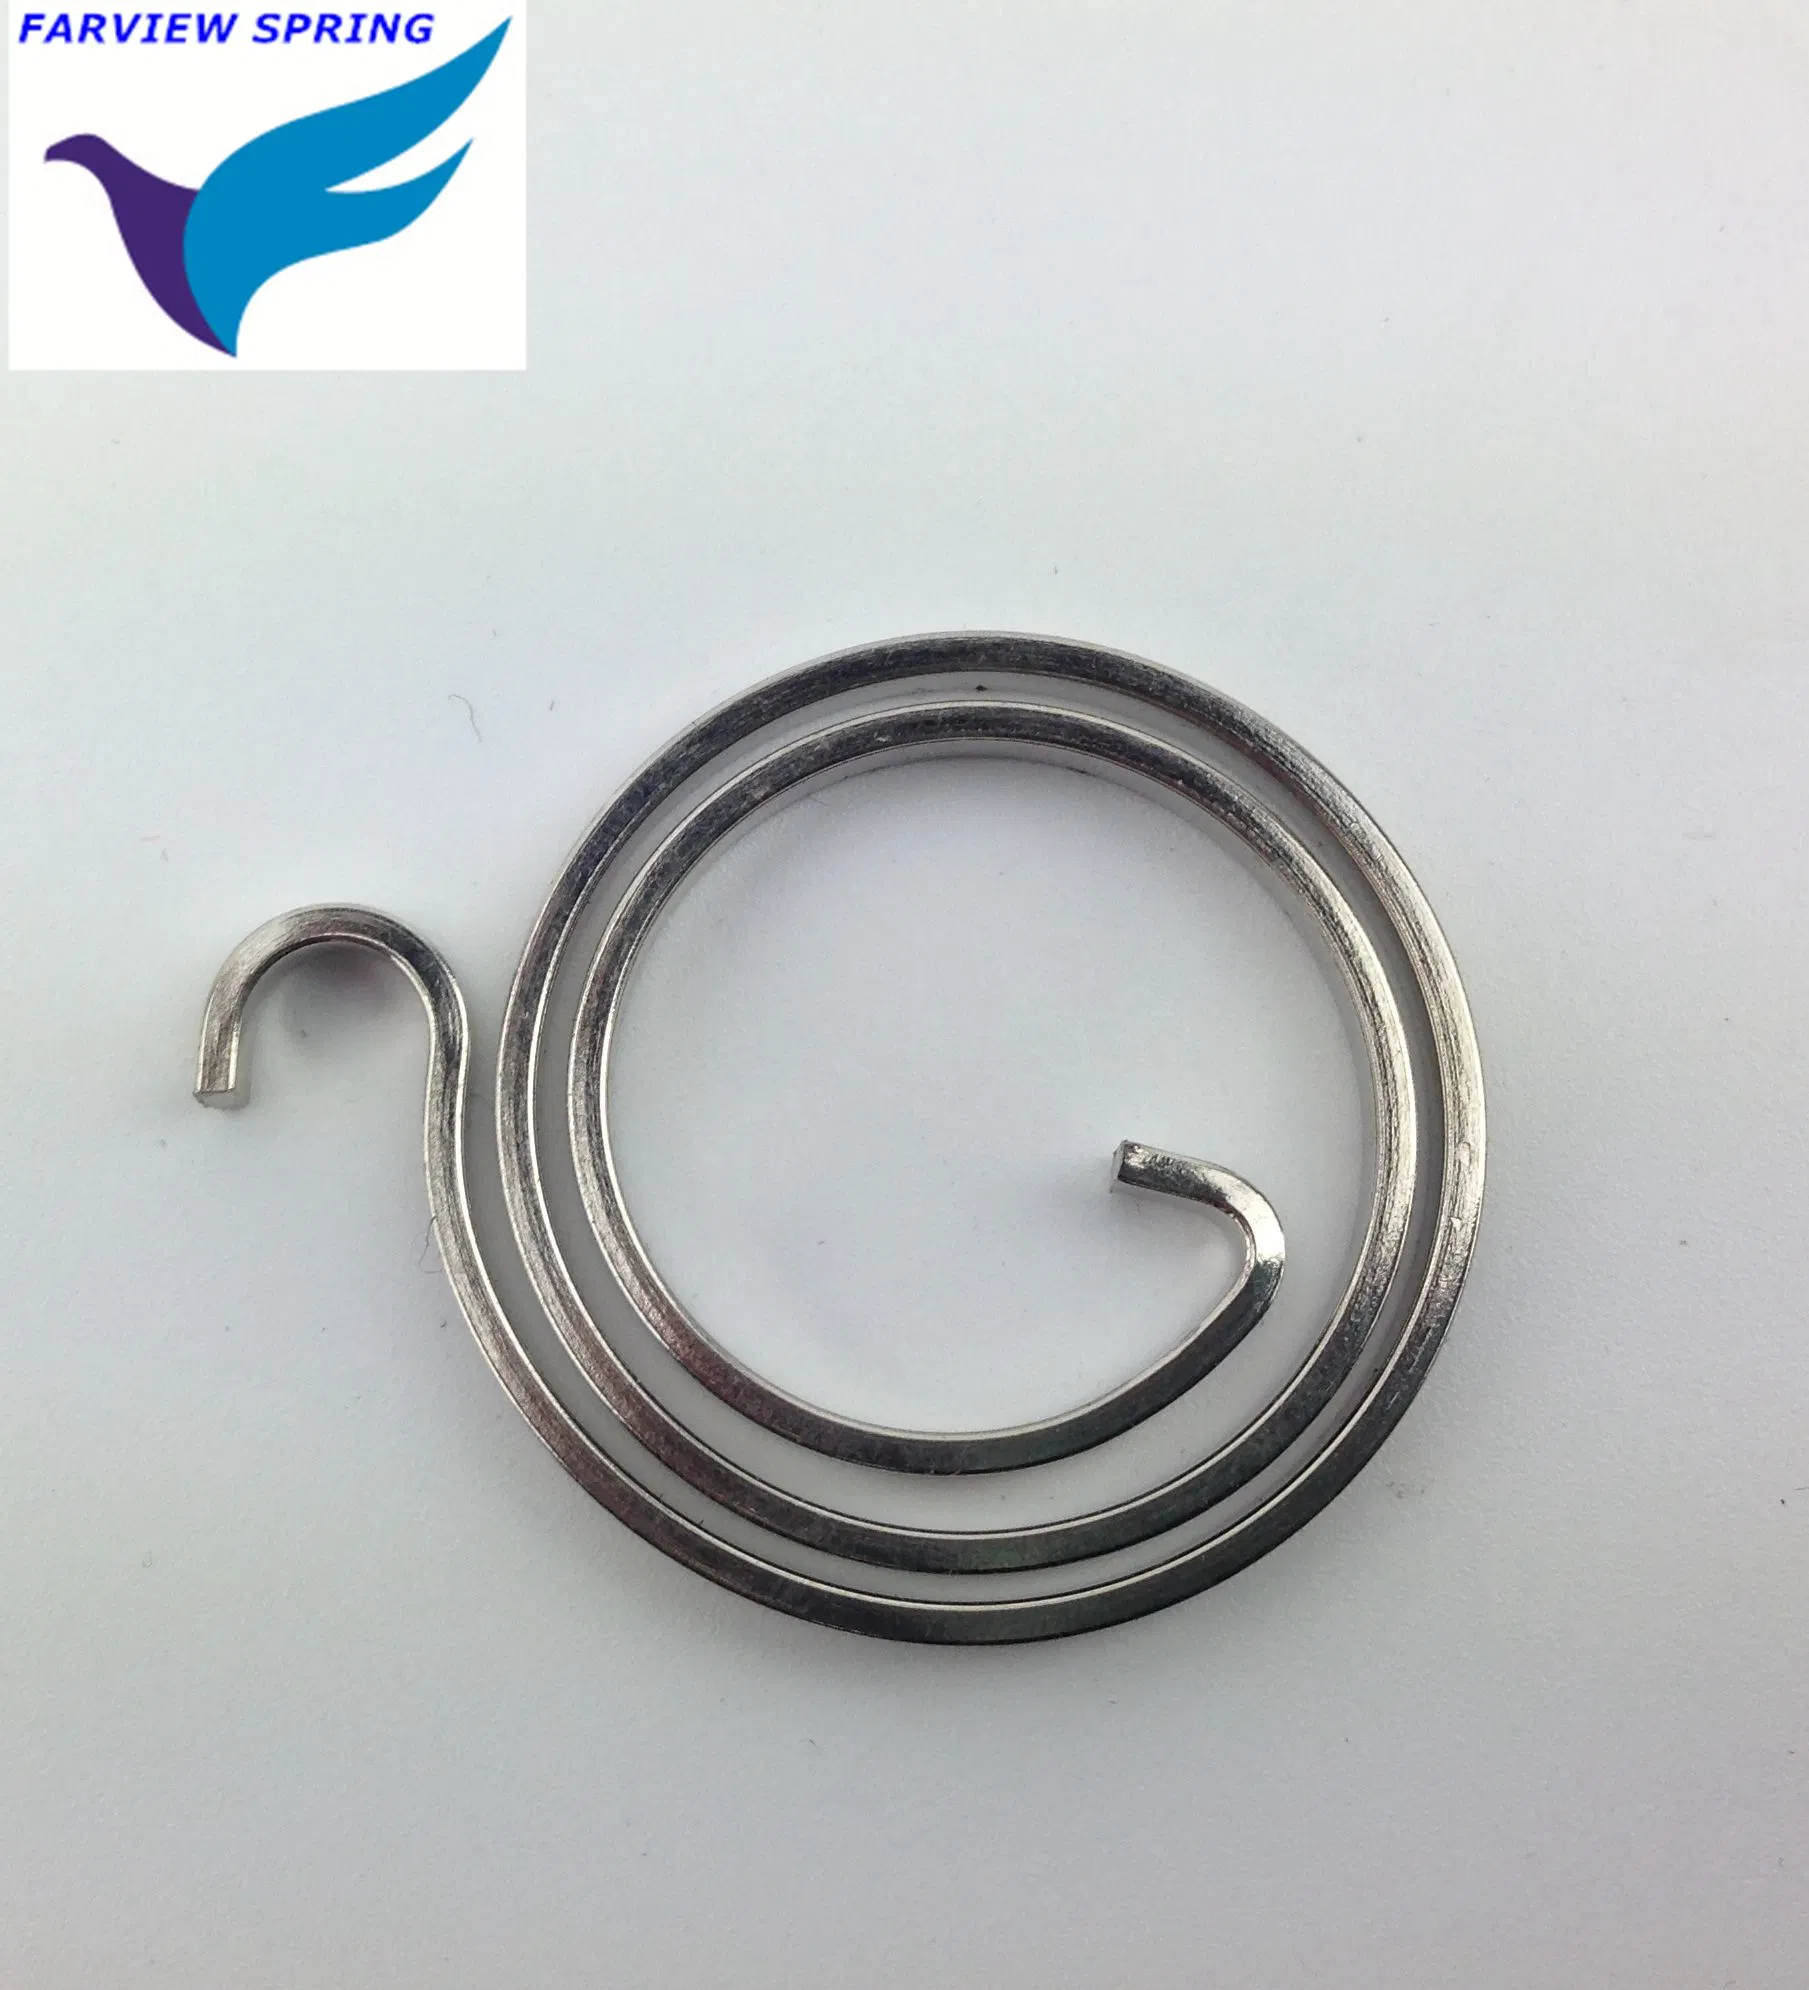 Hot Sale Farview Manufacturing Coiling Vending Machine Curtain Clock Spring Spiral Cable